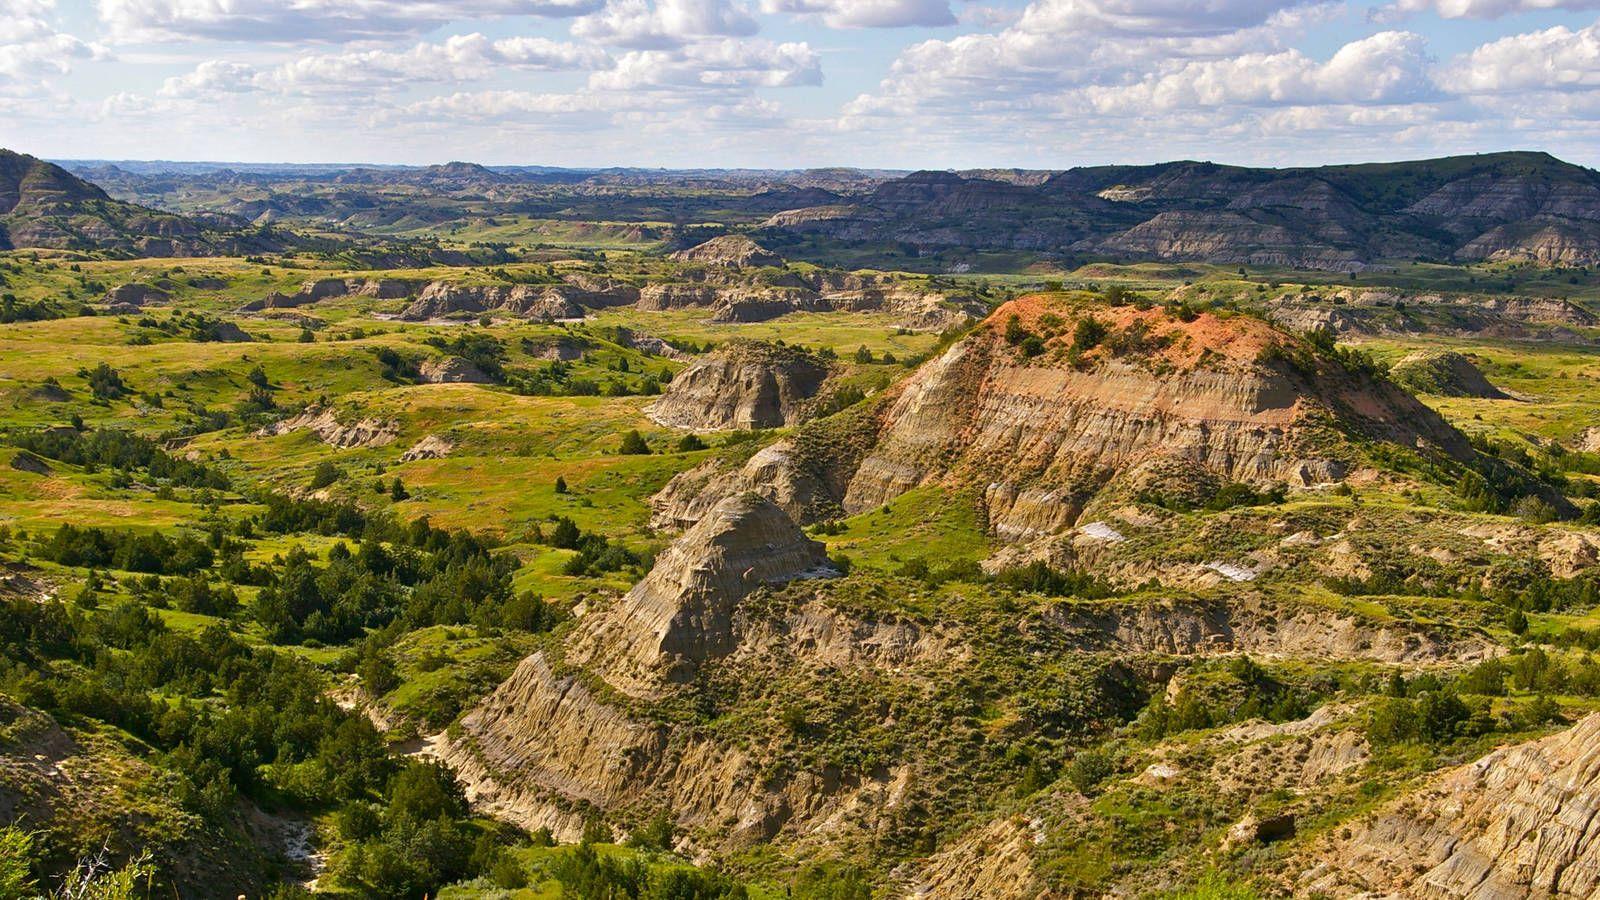 Proposed Oil Refinery Threatens Theodore Roosevelt National Park